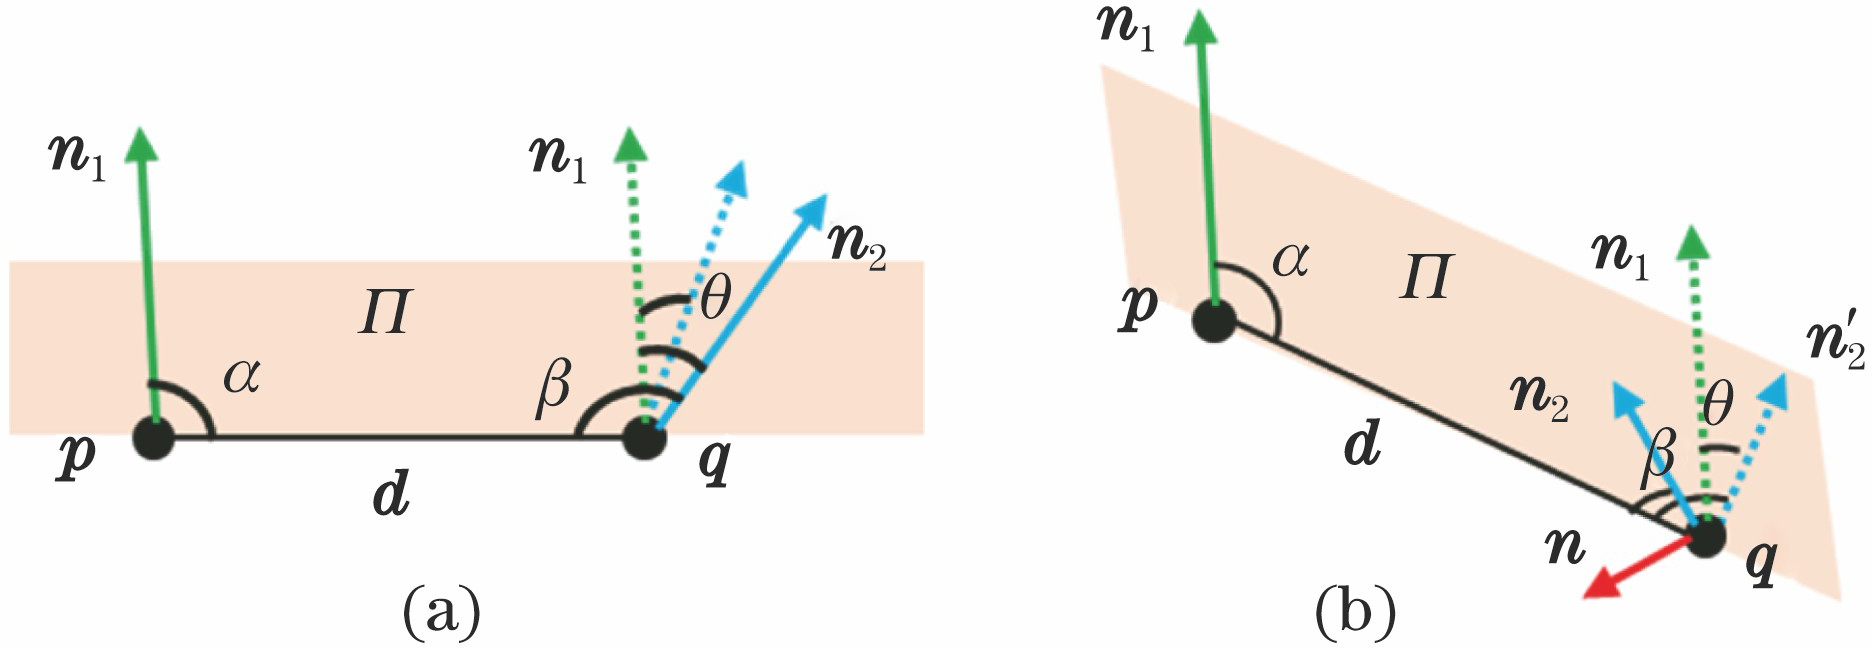 Schematic of ambiguity of original point pair feature. (a) Front view; (b) side view